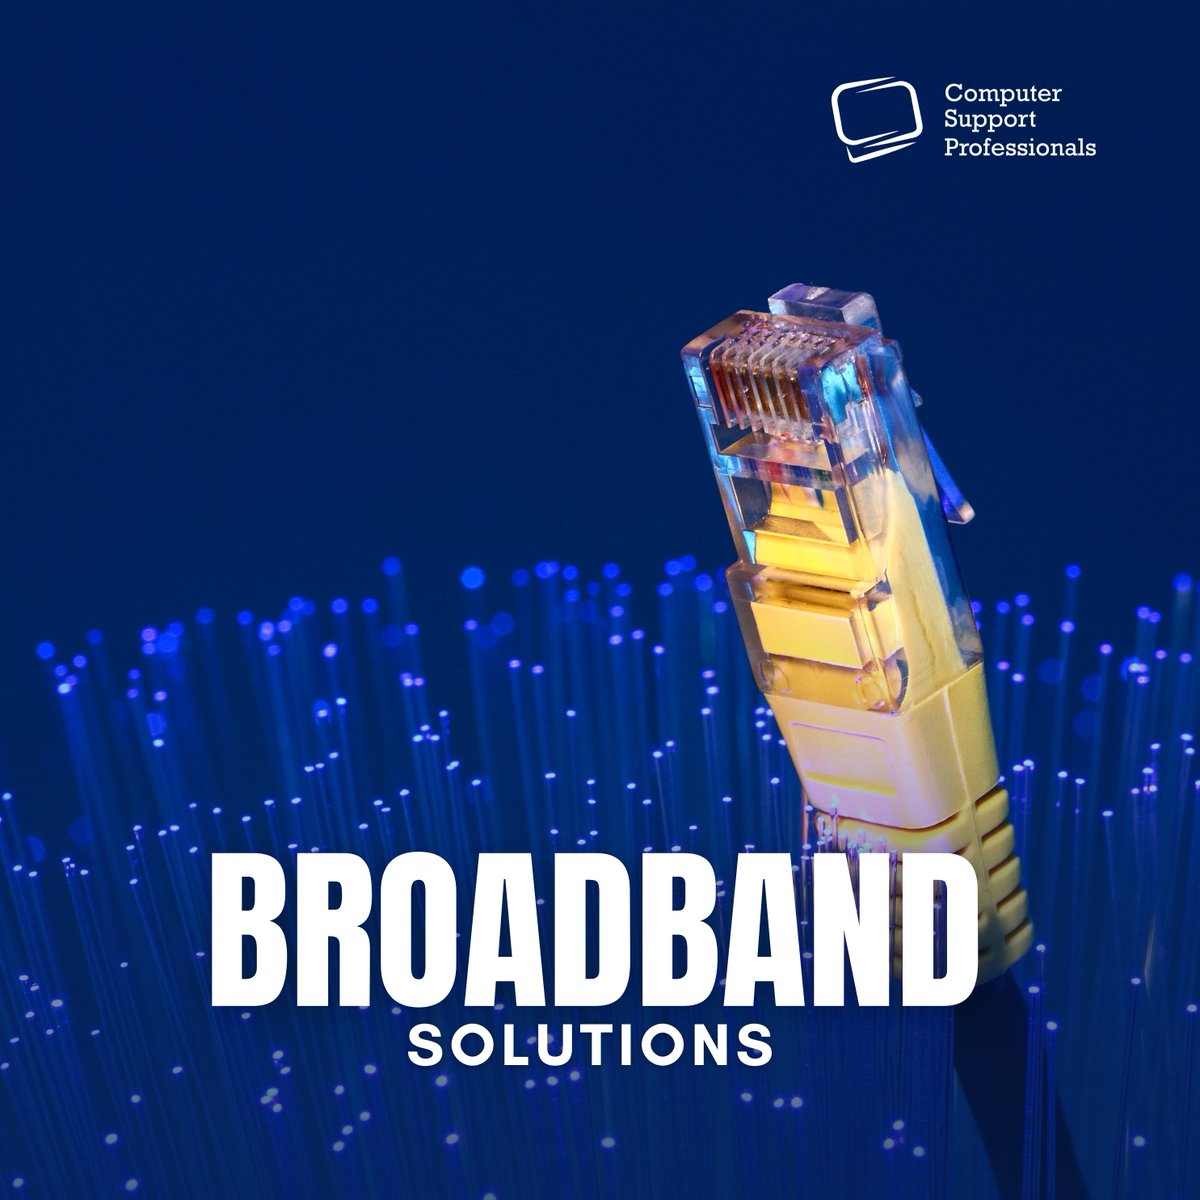 Is your broadband under performing?
Are you having a problem with your Wi-Fi router/modem?

we can provide high-speed Internet access !

#broadband #internet #WIFI #technology 
#telecom #wireless #telecommunications 
#internetserviceprovider #cspro #australia